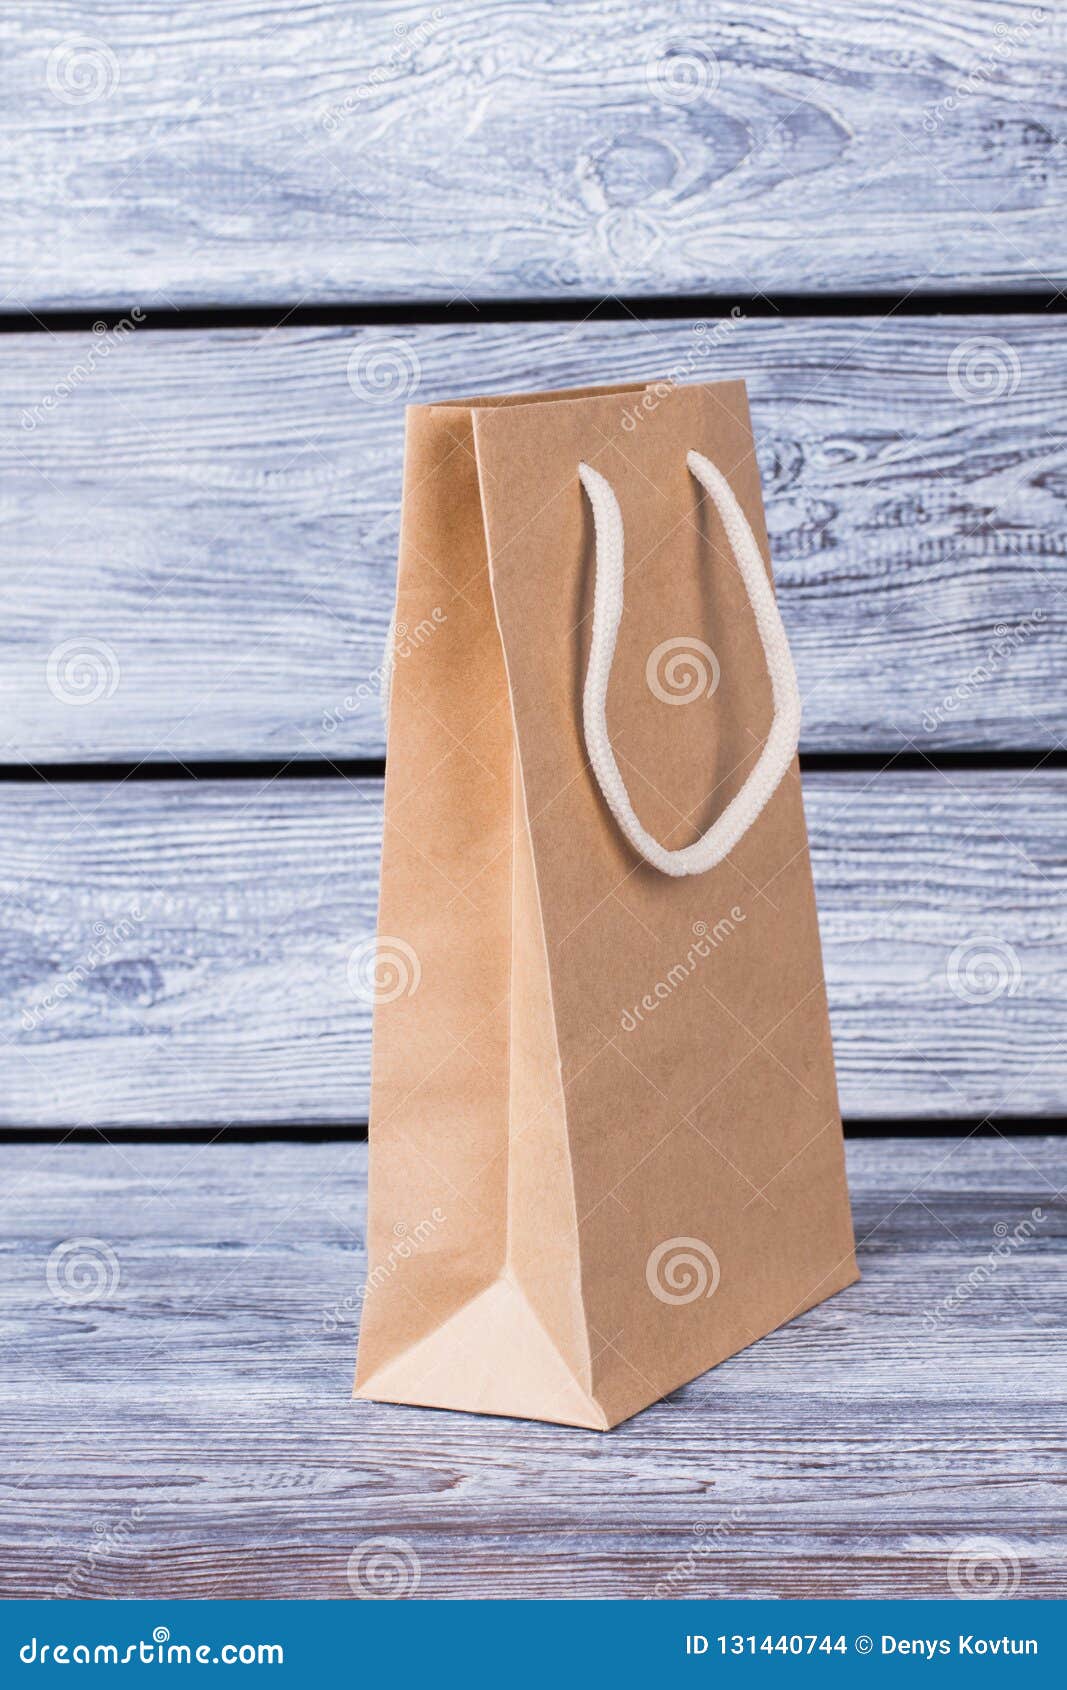 Kraft Paper Bags - Brown & White Paper Bags with Handles